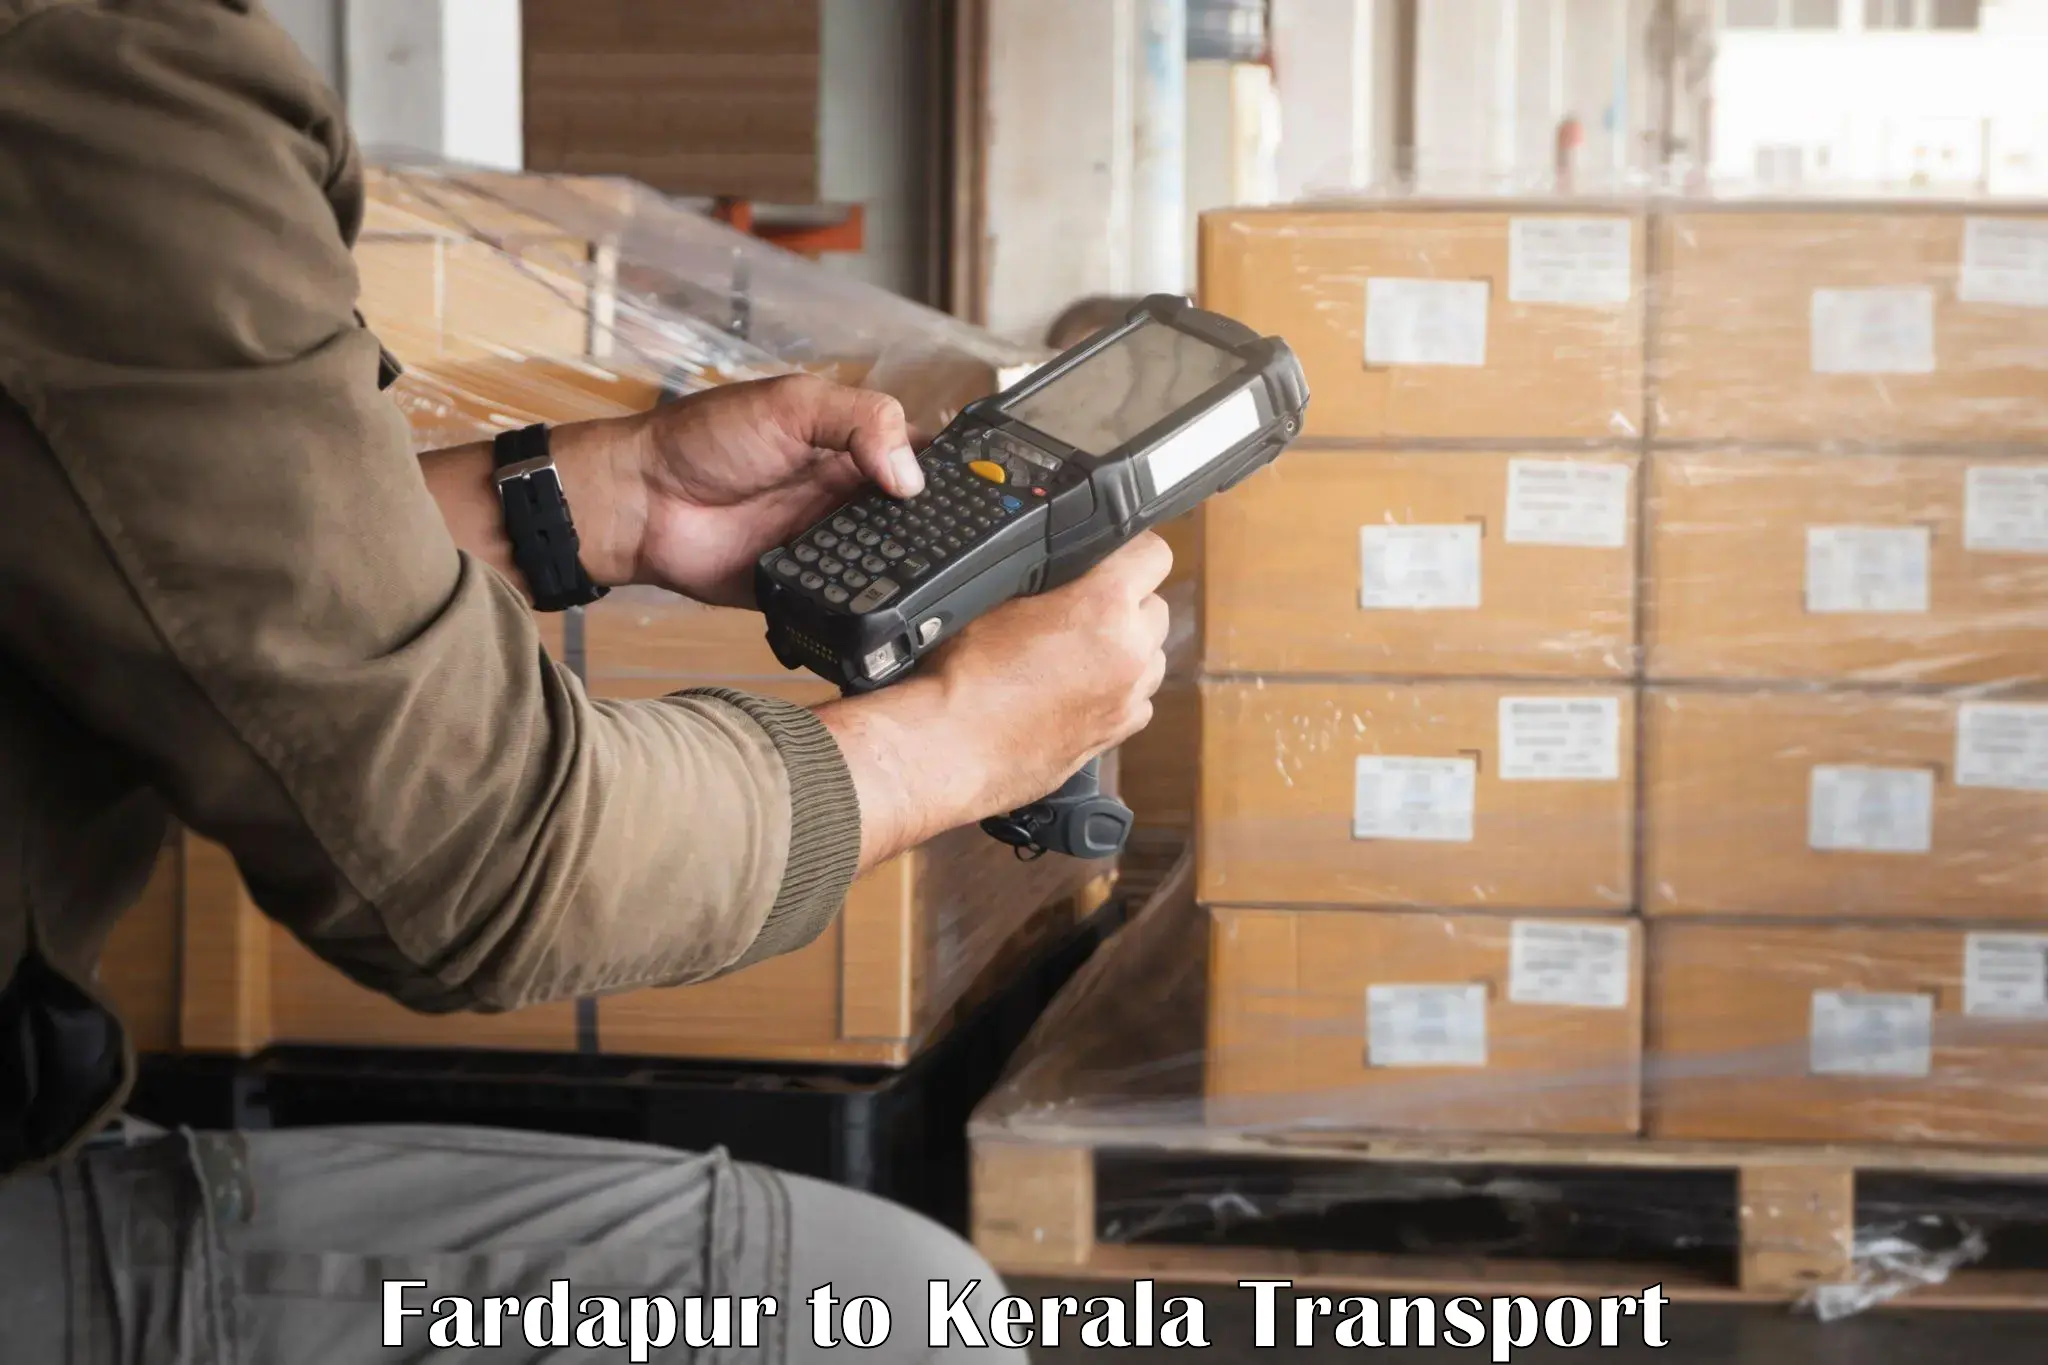 Delivery service Fardapur to Palai